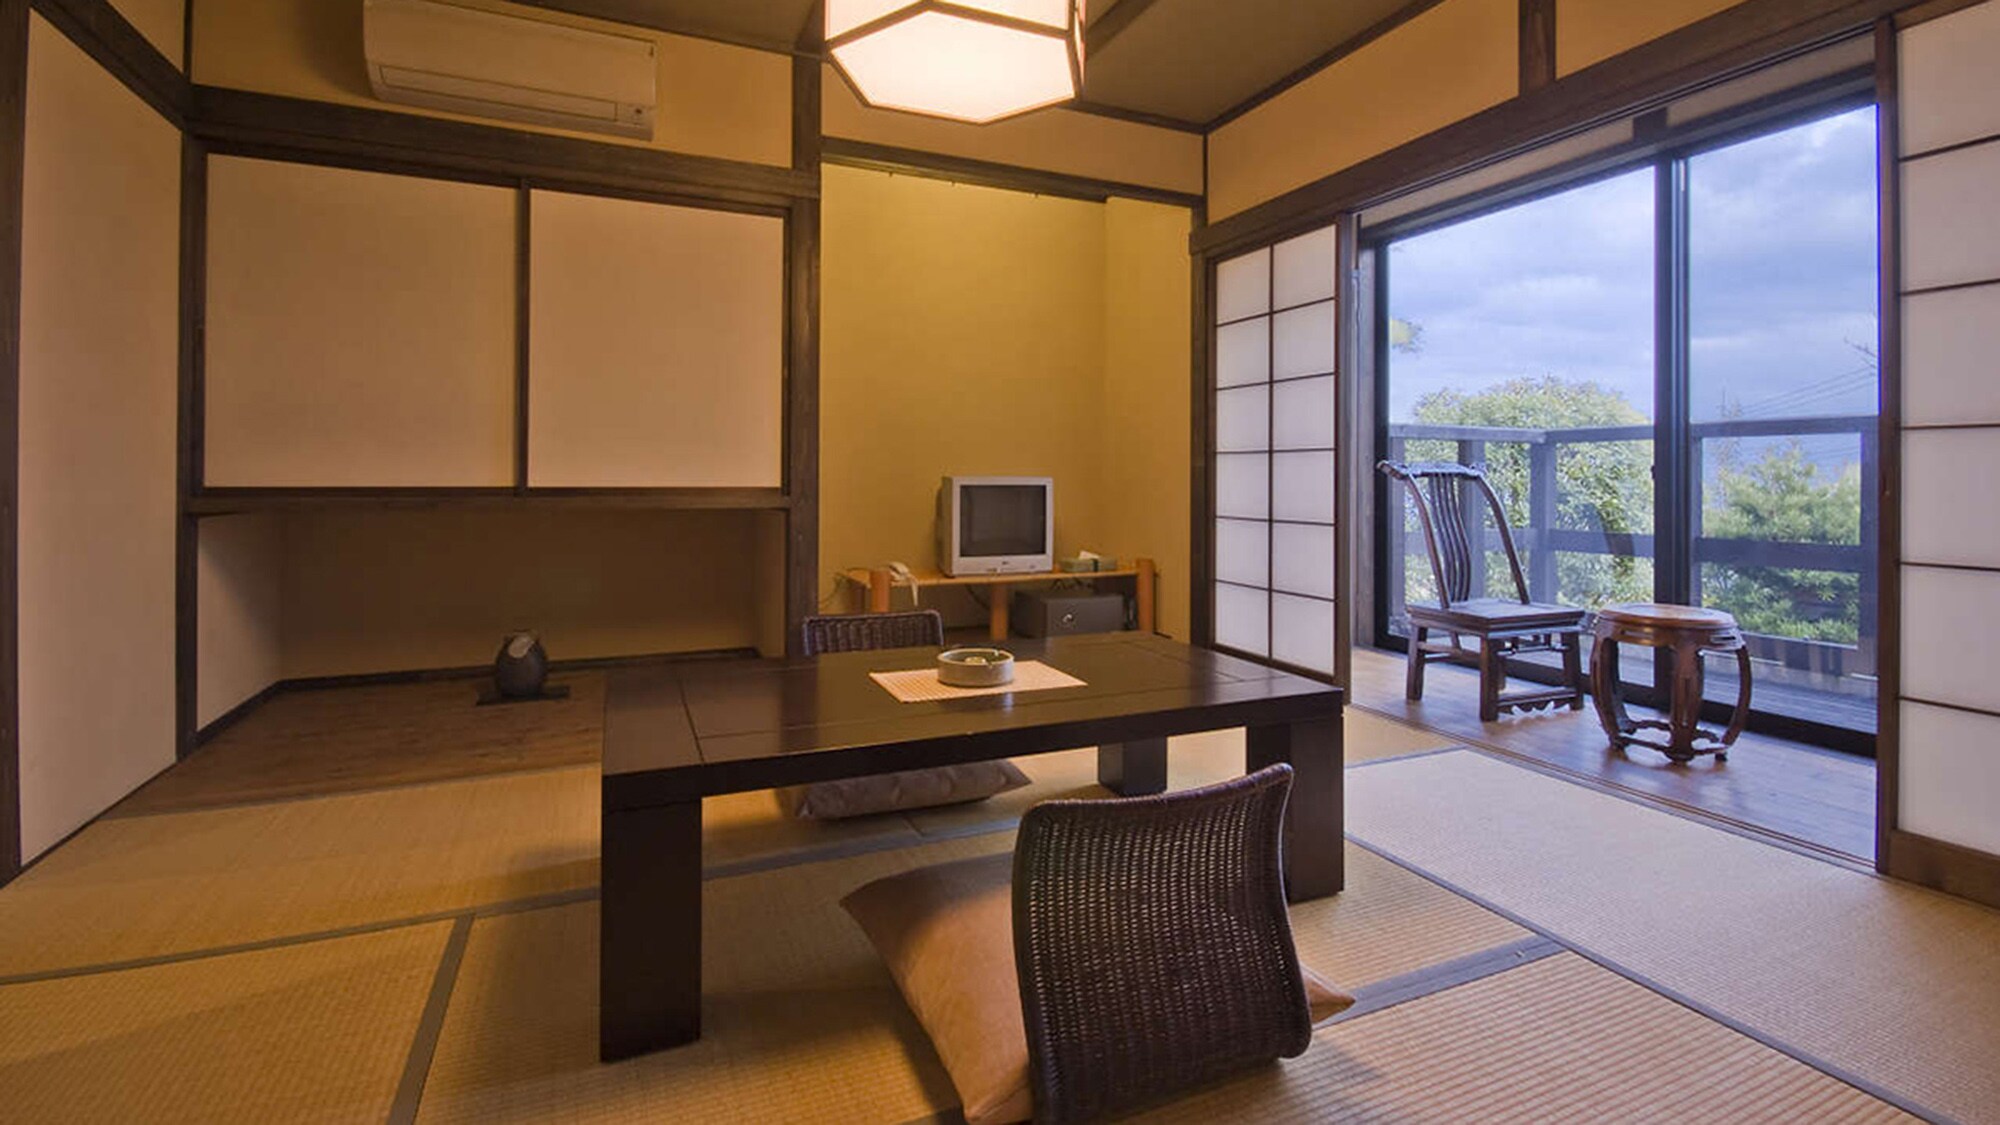 Separate guest room Japanese-style room + twin bedroom + terrace + private semi-open-air bath